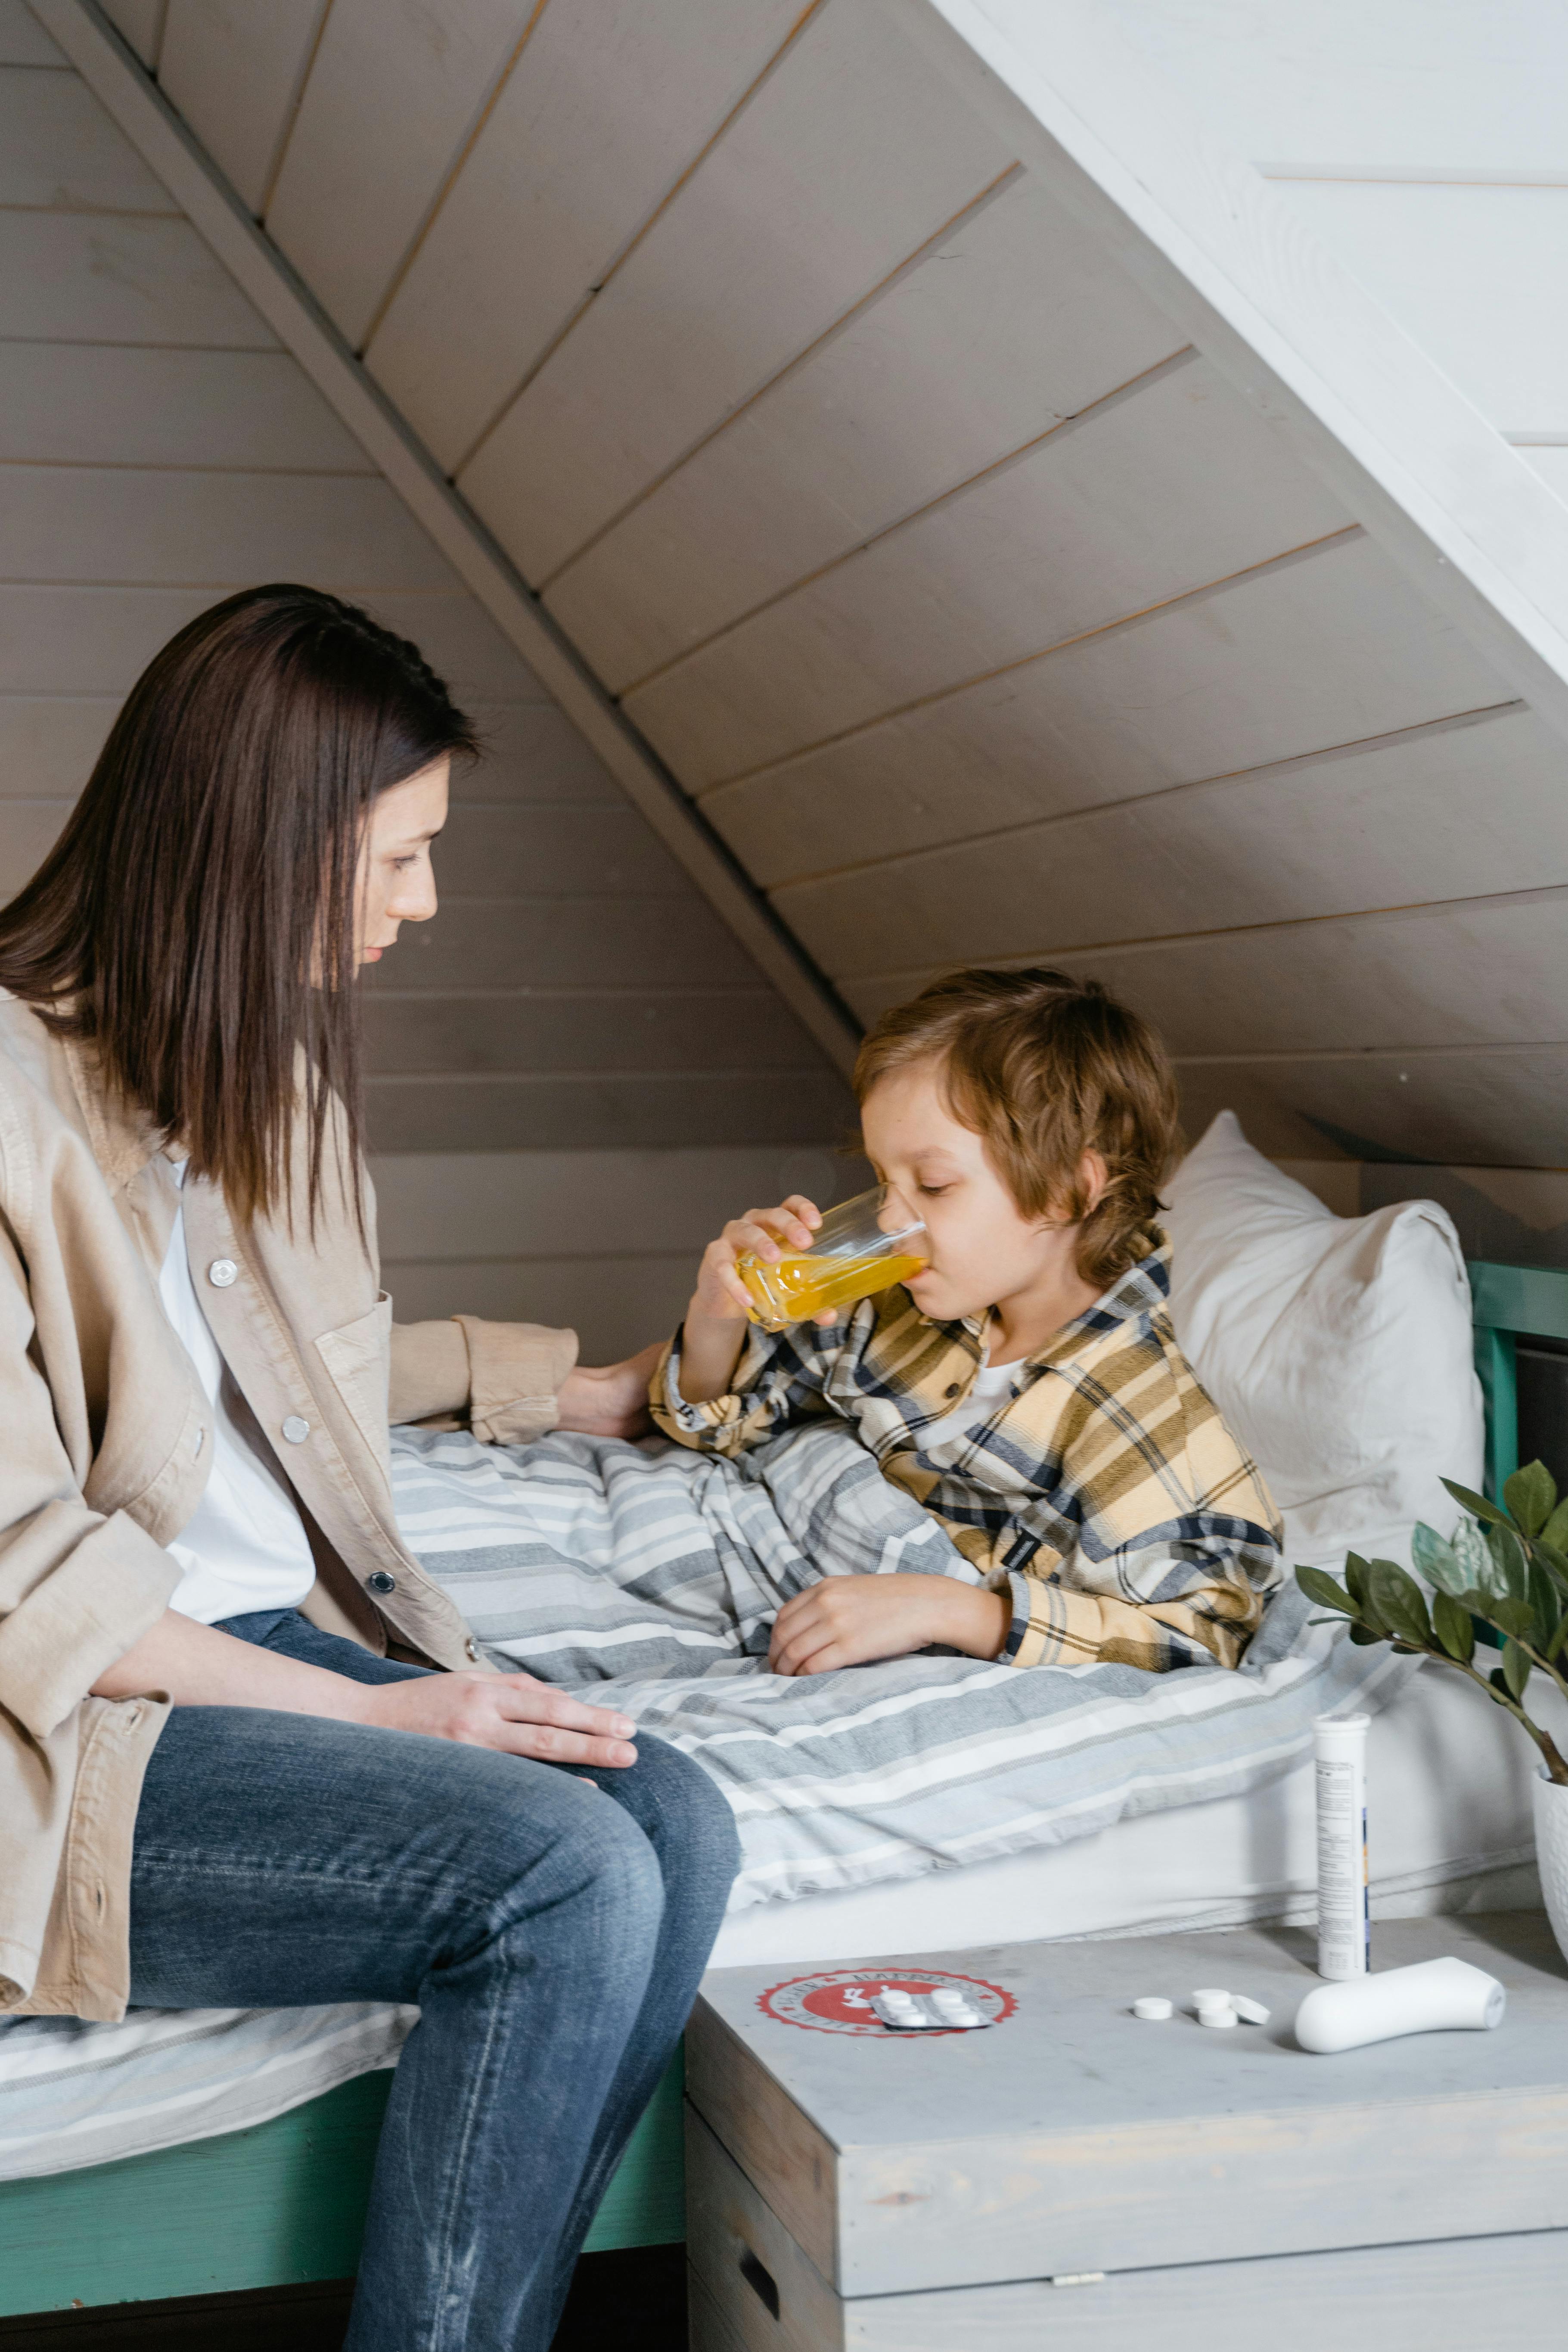 A woman talking to a child drinking juice in bed | Source: Pexels